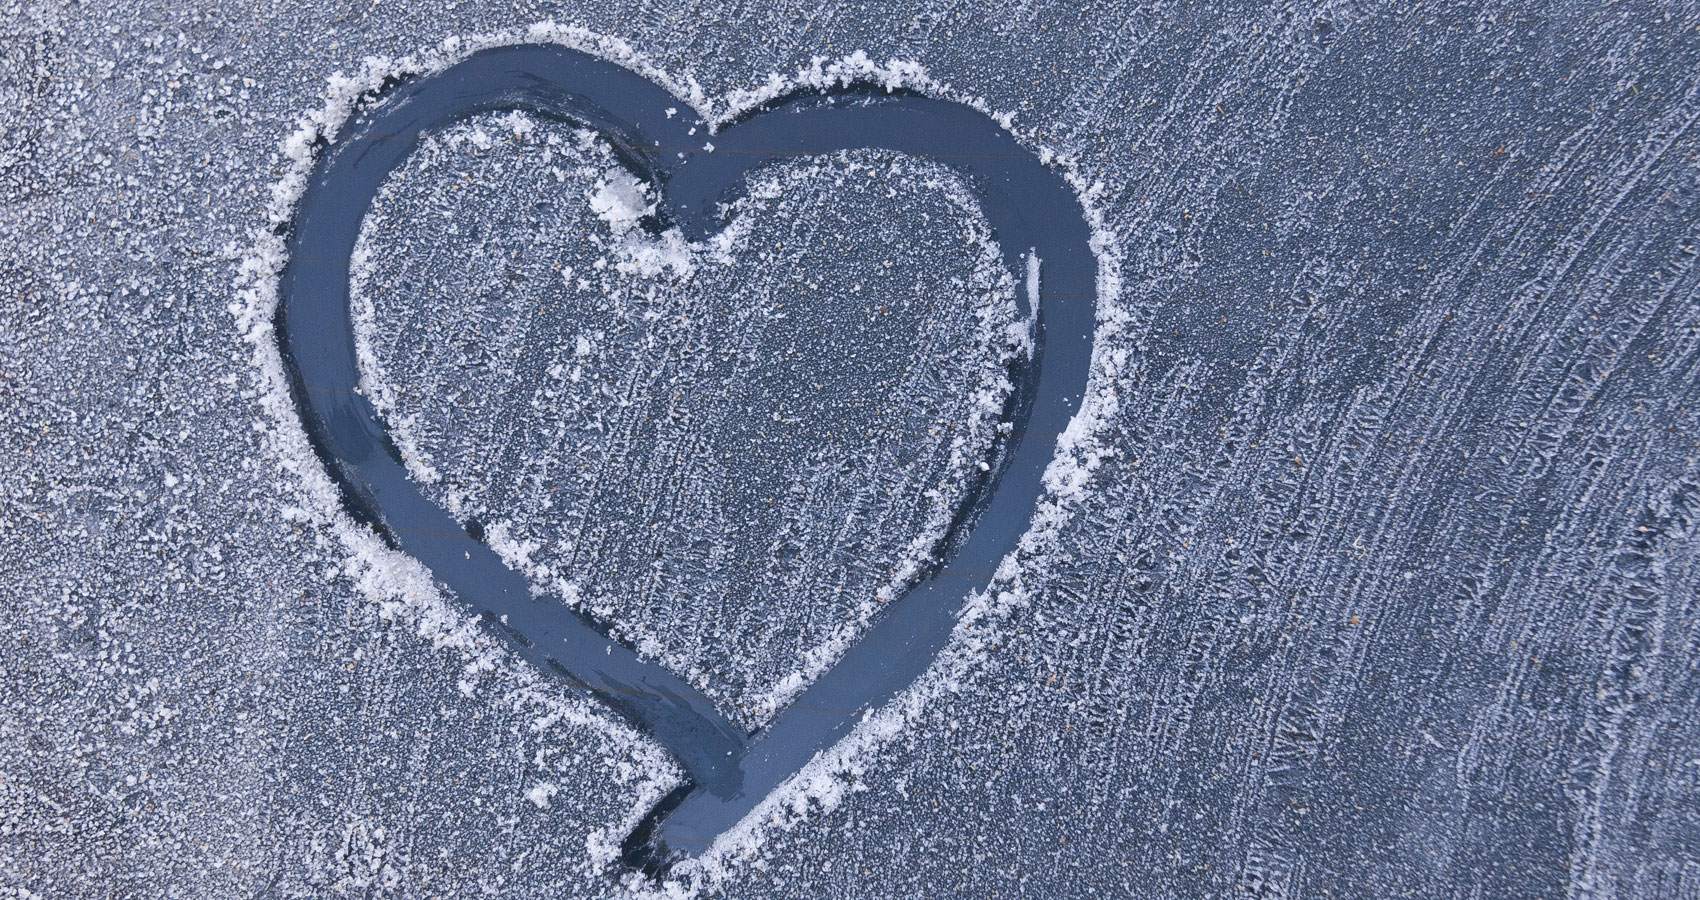 Cold Hearts, micropoetry written by Susi Bocks at Spillwords.com